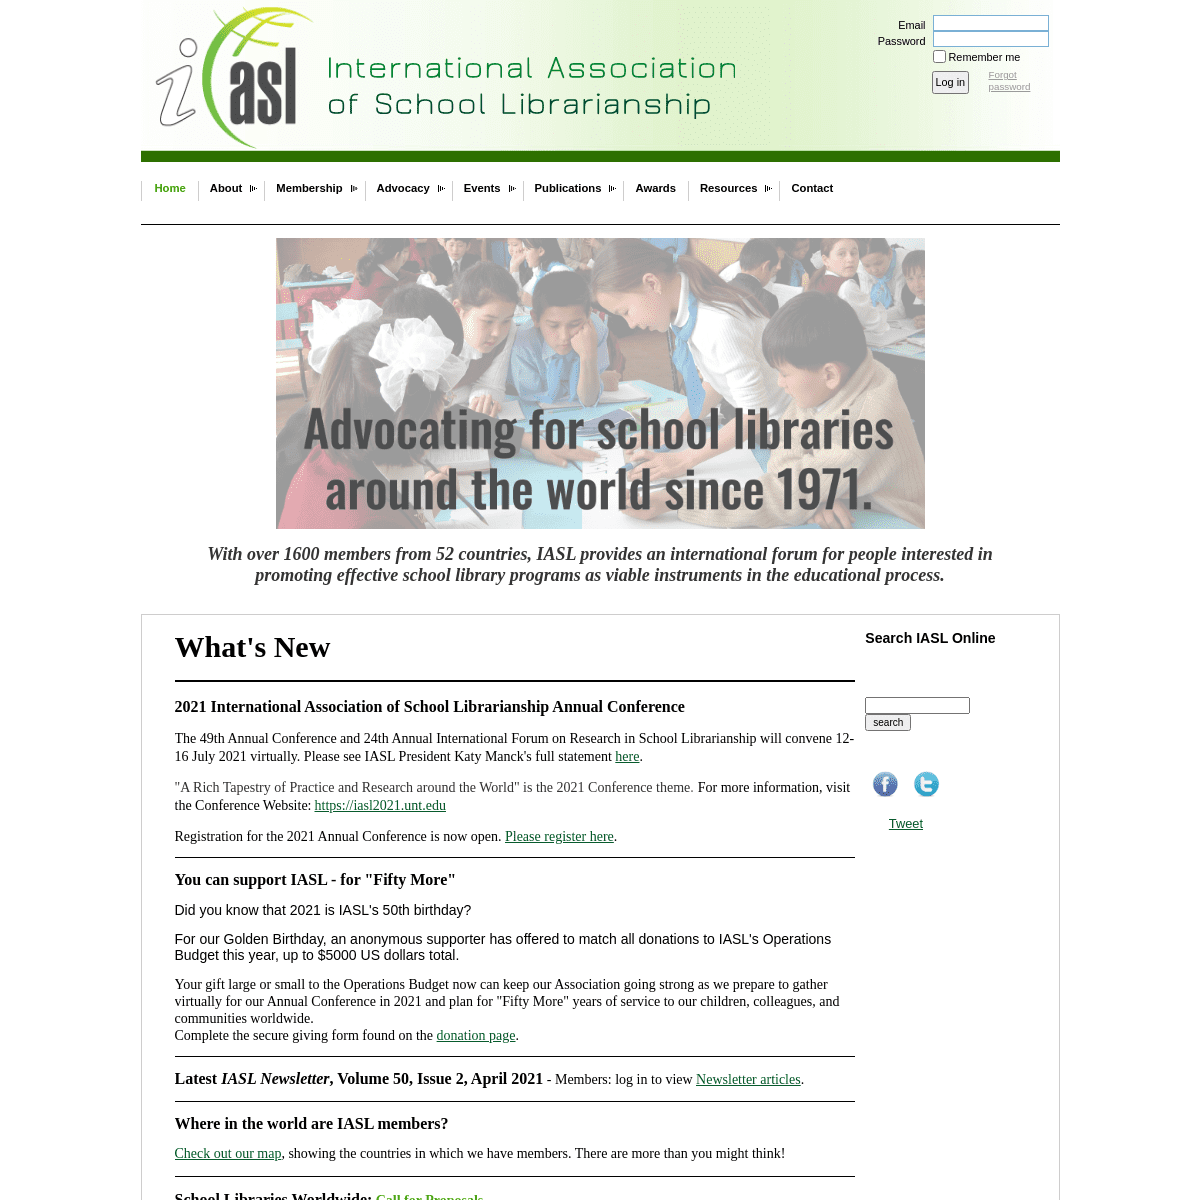 A complete backup of https://iasl-online.org